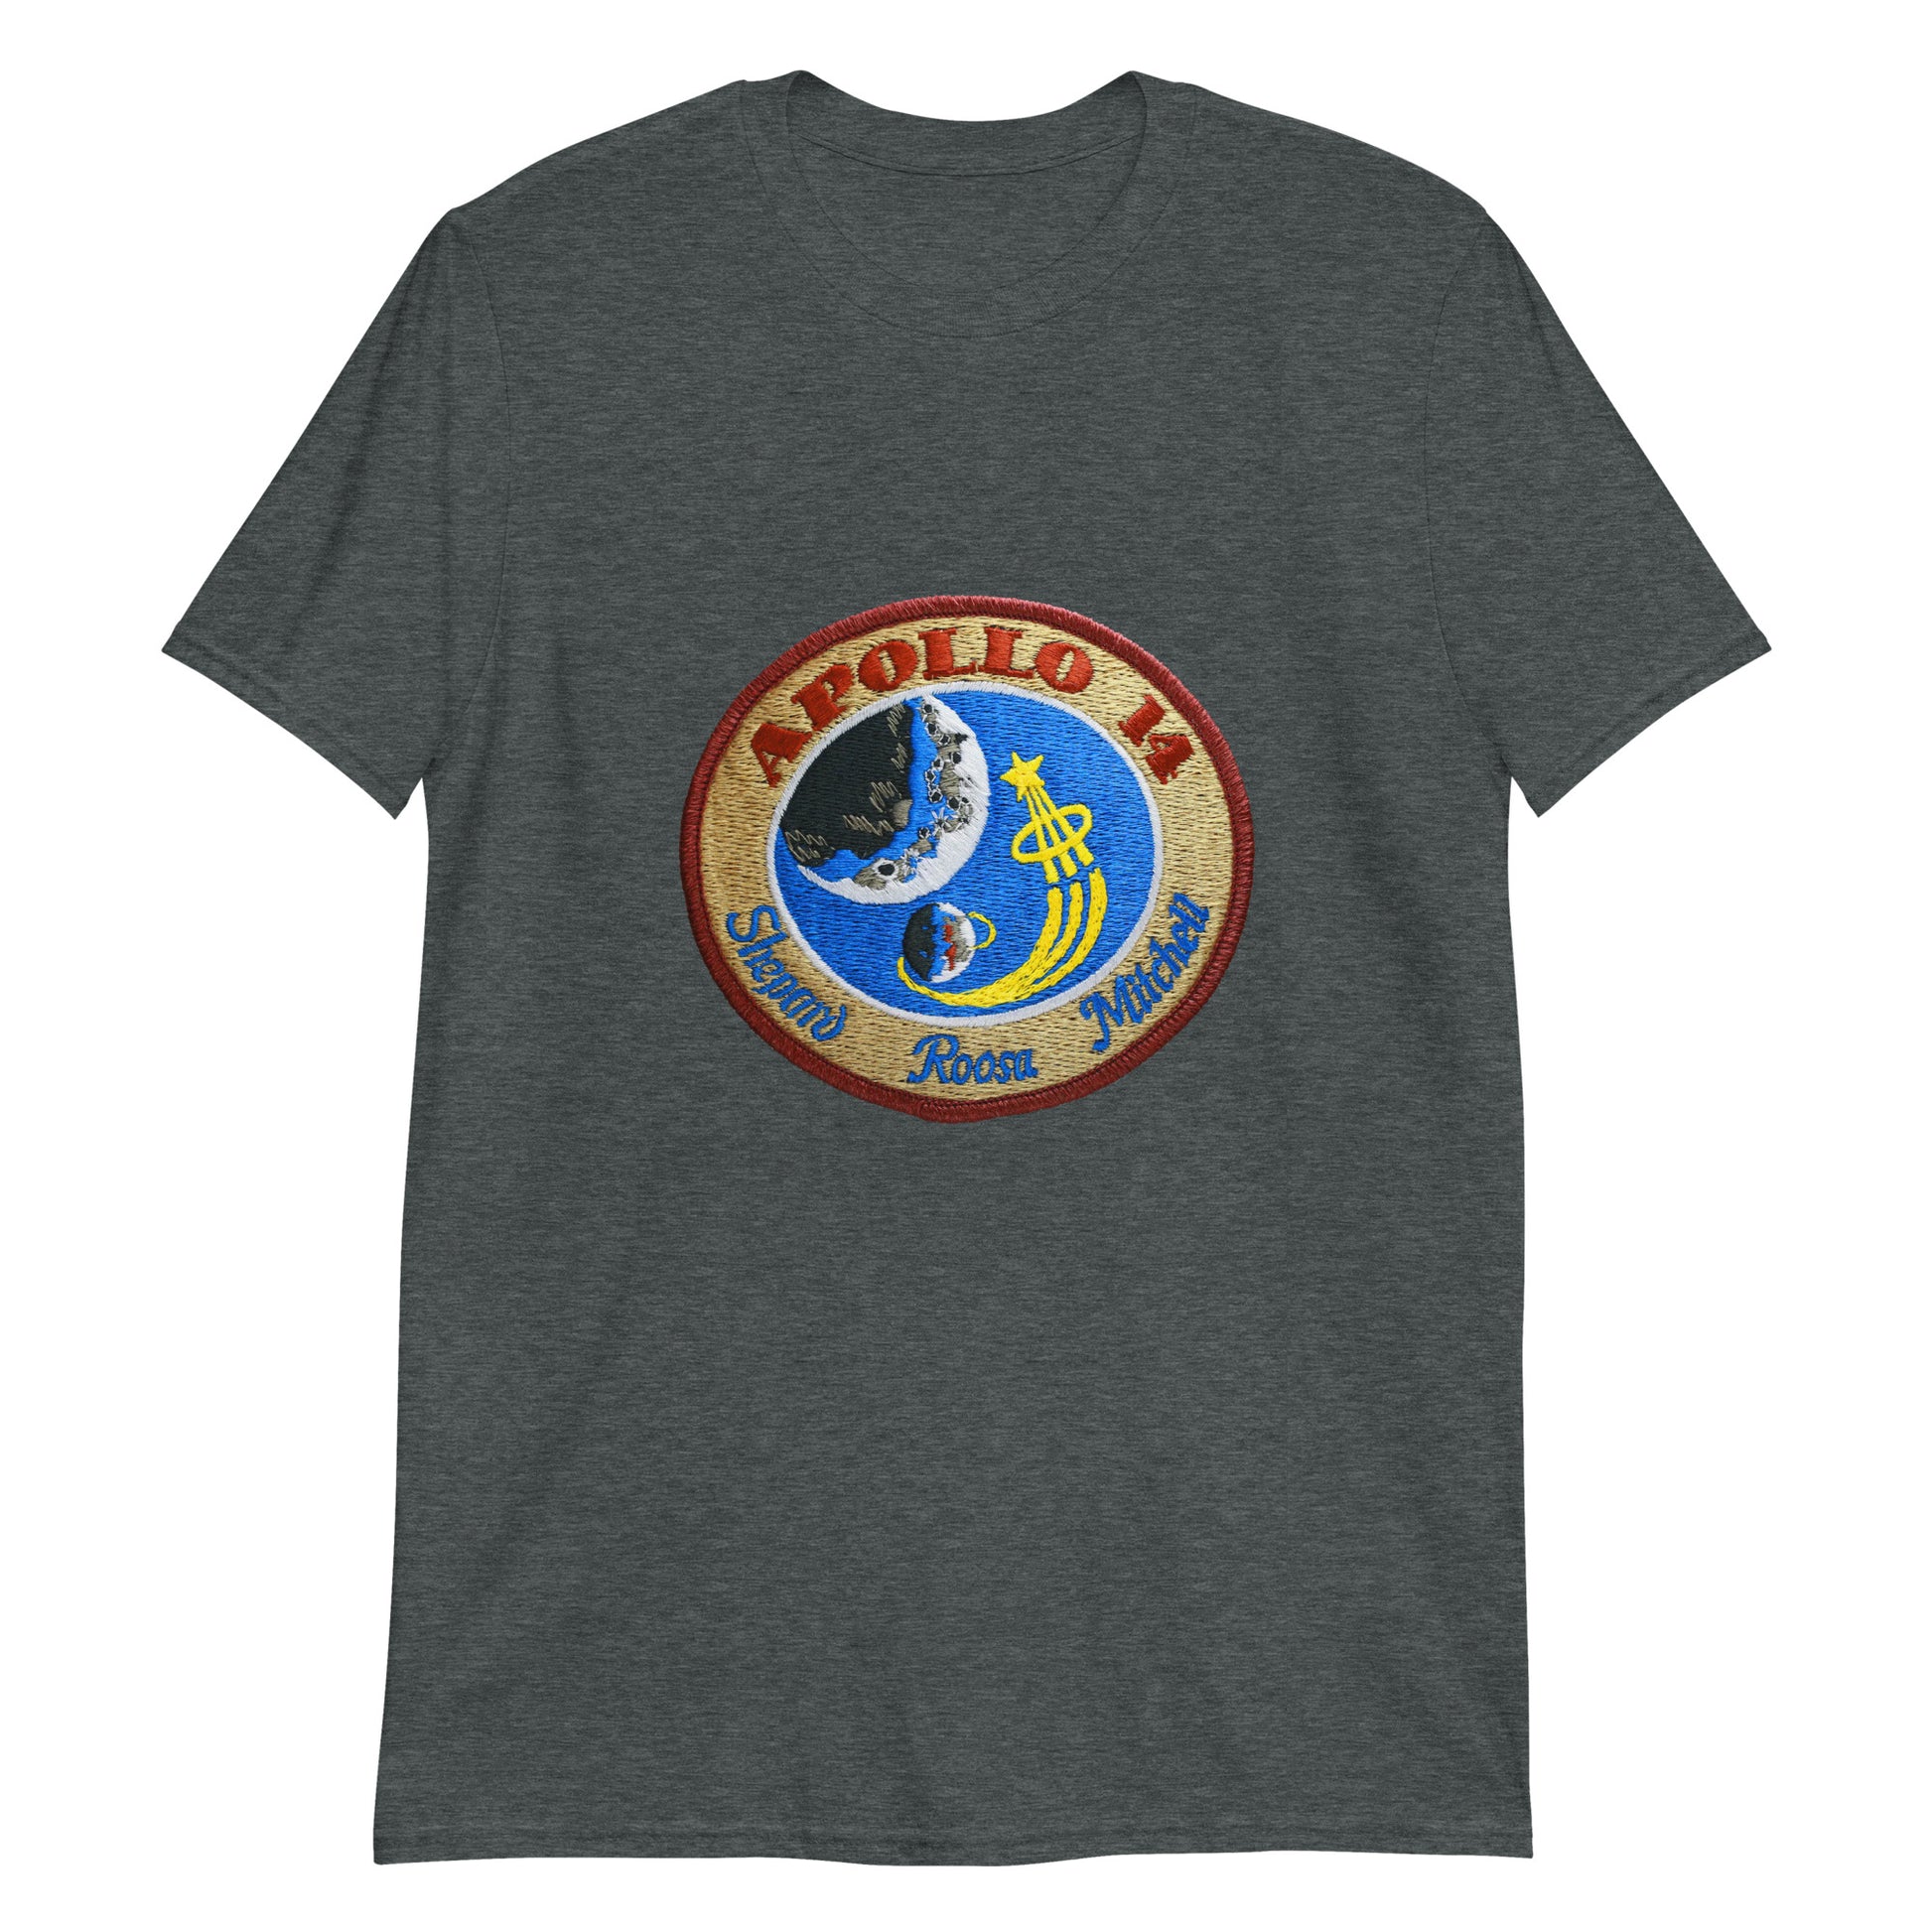 Astro Tshirts Apollo 14 Mission Patch T-Shirt | Space Exploration Tee Dark Heather / XL